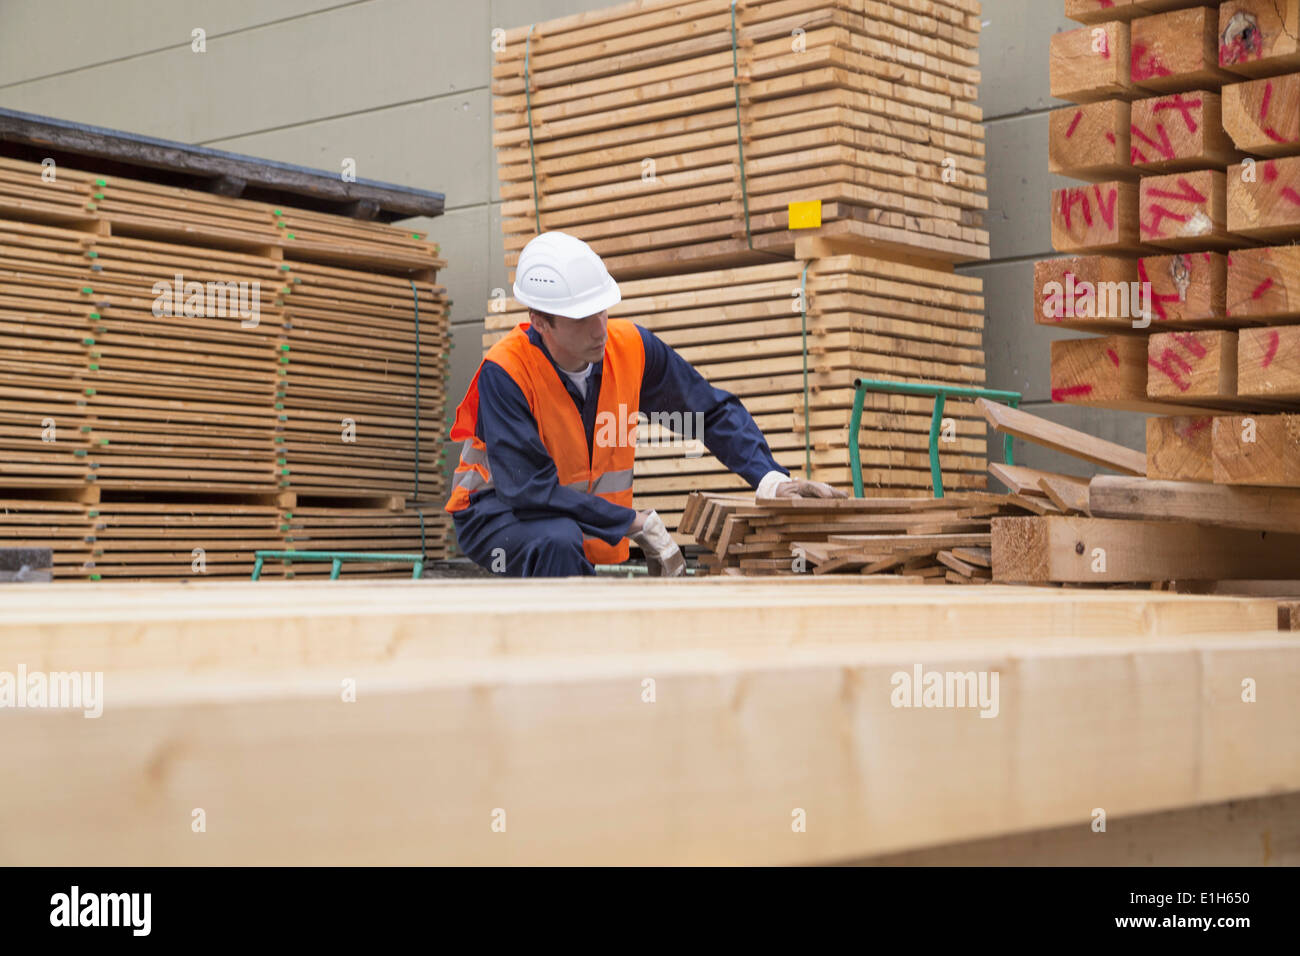 Woodworker sorting wooden planks in timber yard Stock Photo